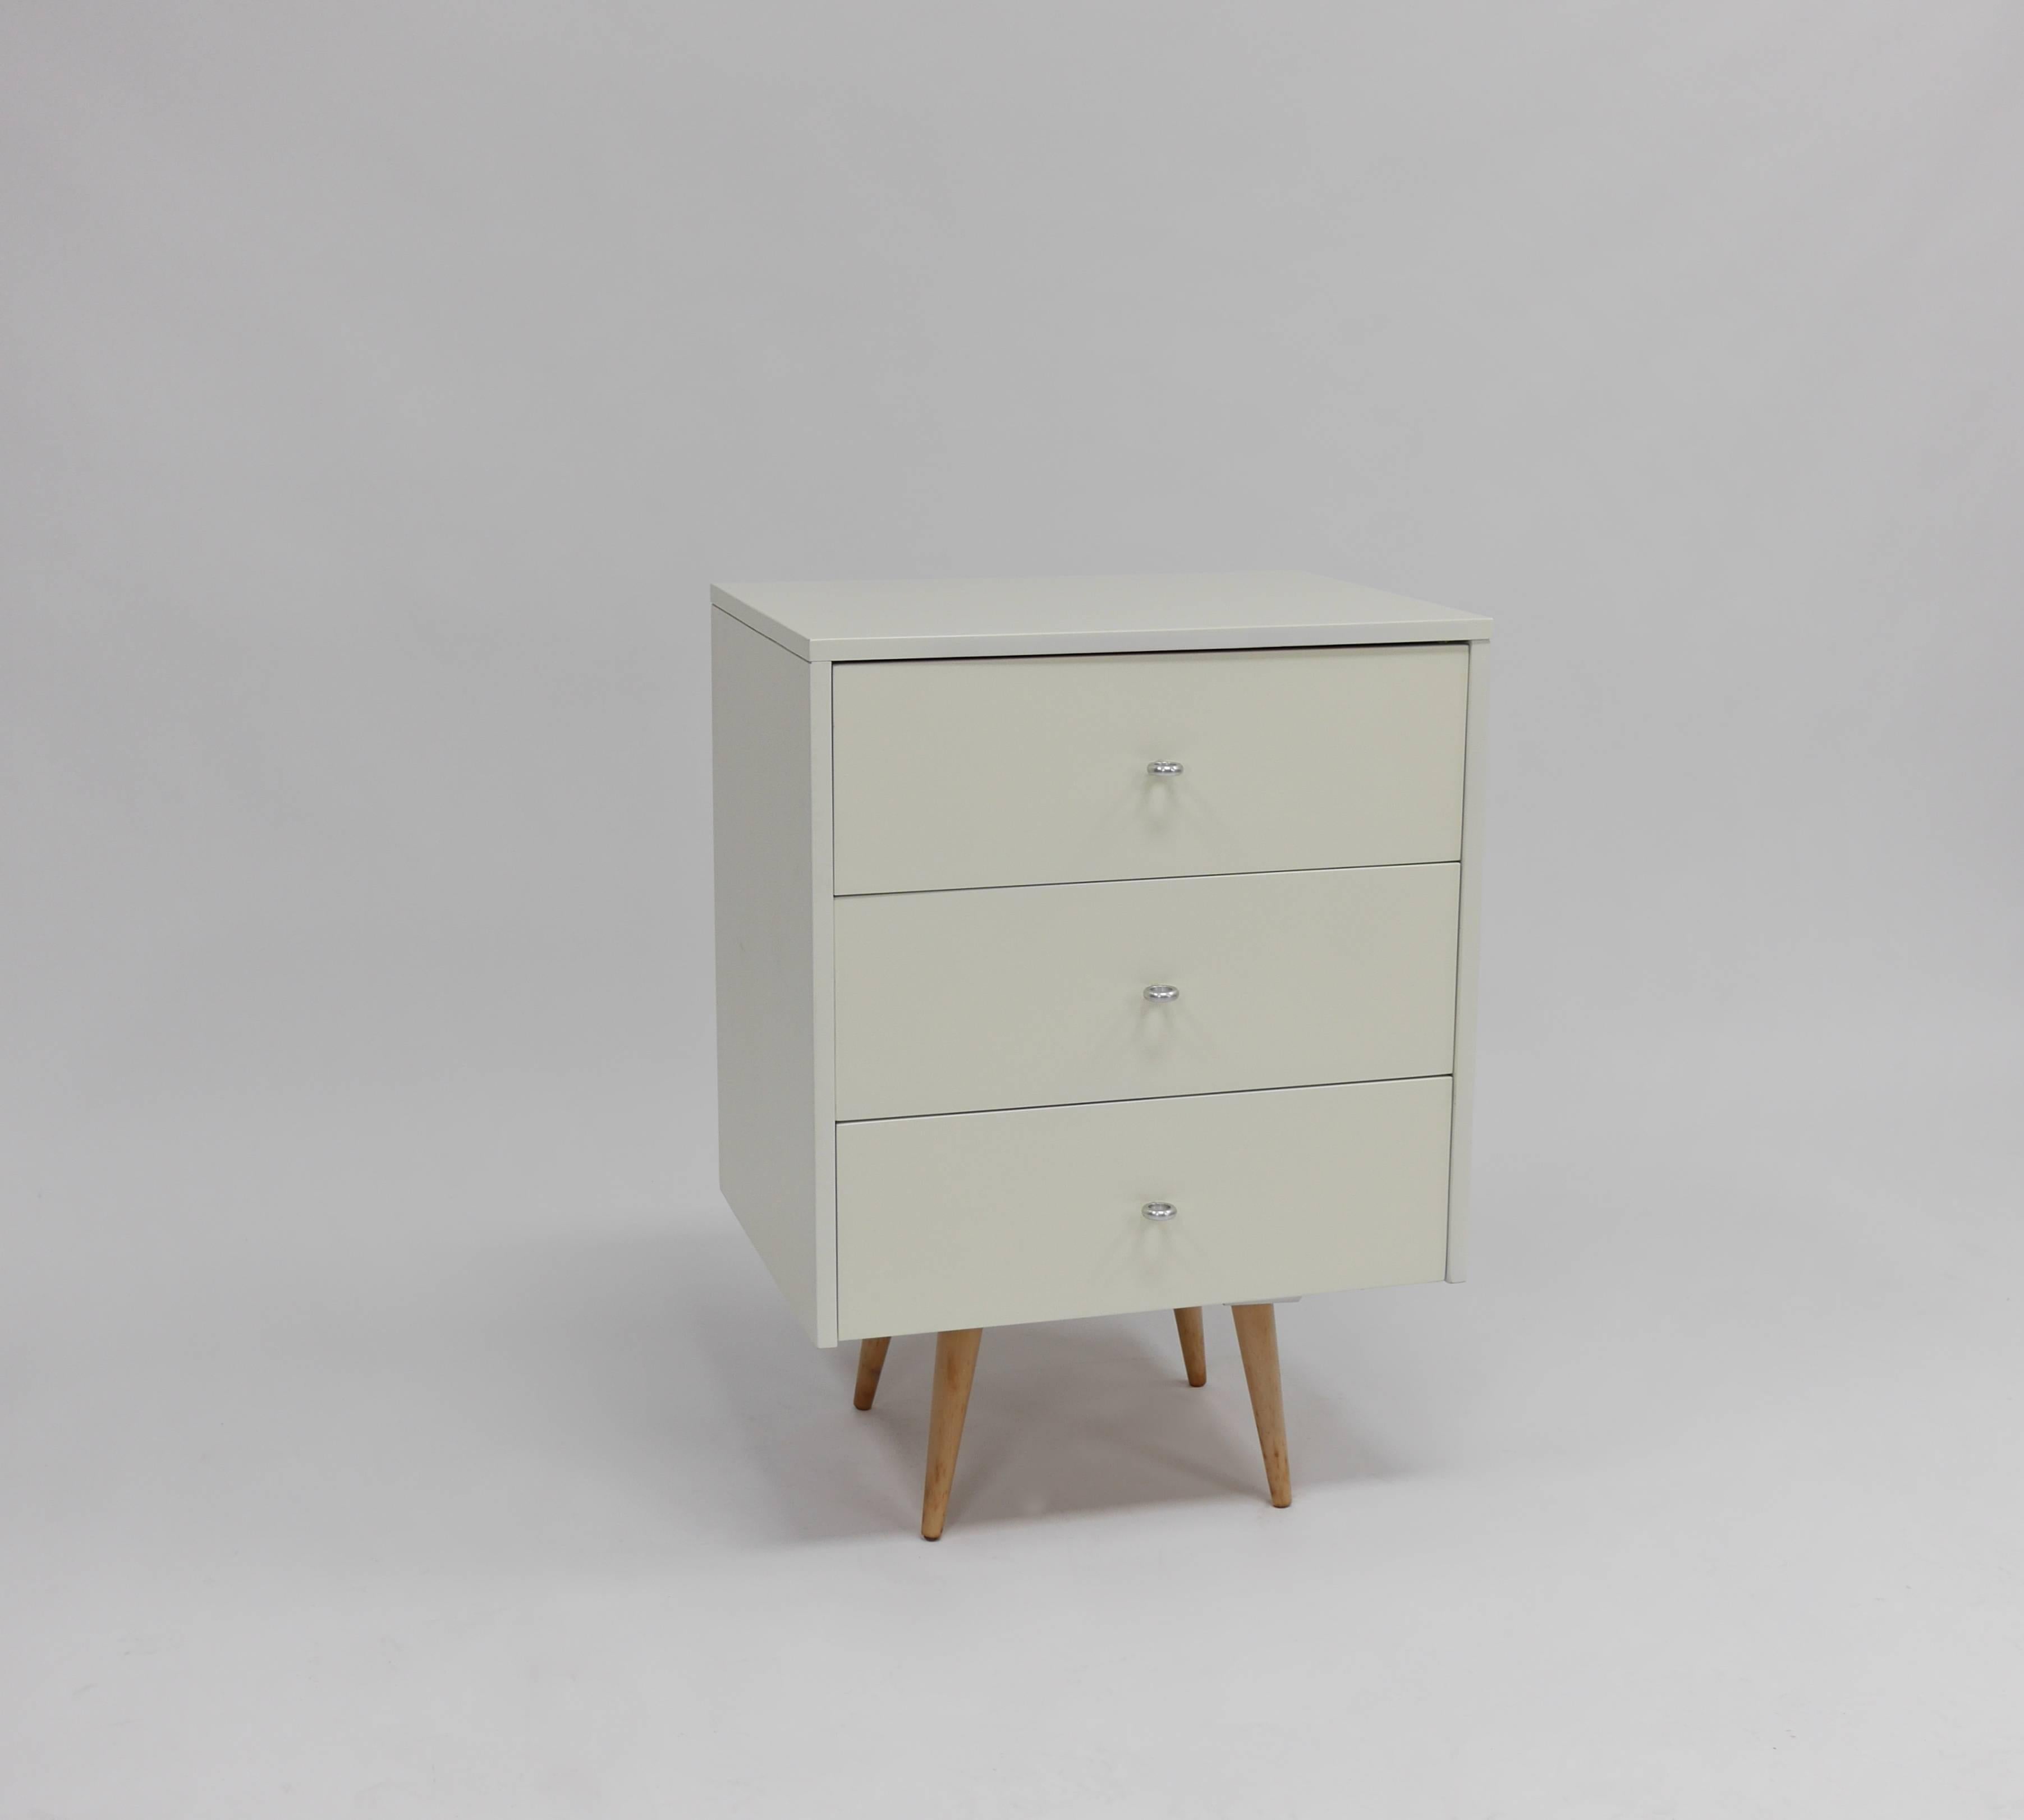 Pair of Nightstands in White Lacquer by Paul McCobb In Excellent Condition For Sale In Hadley, MA